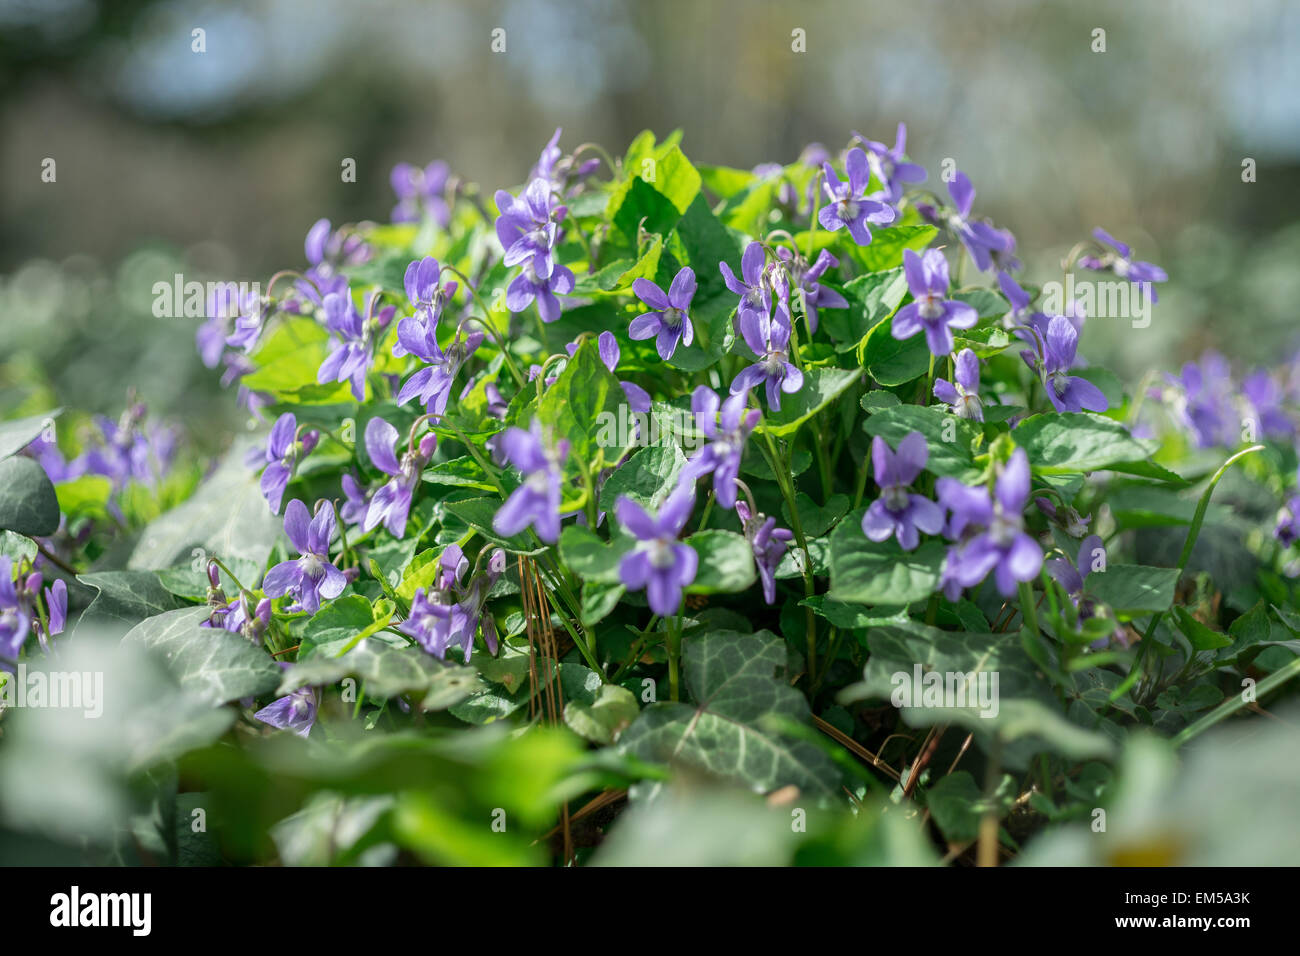 Common dog violet violets in cluster seen from the ground level Viola canina Stock Photo